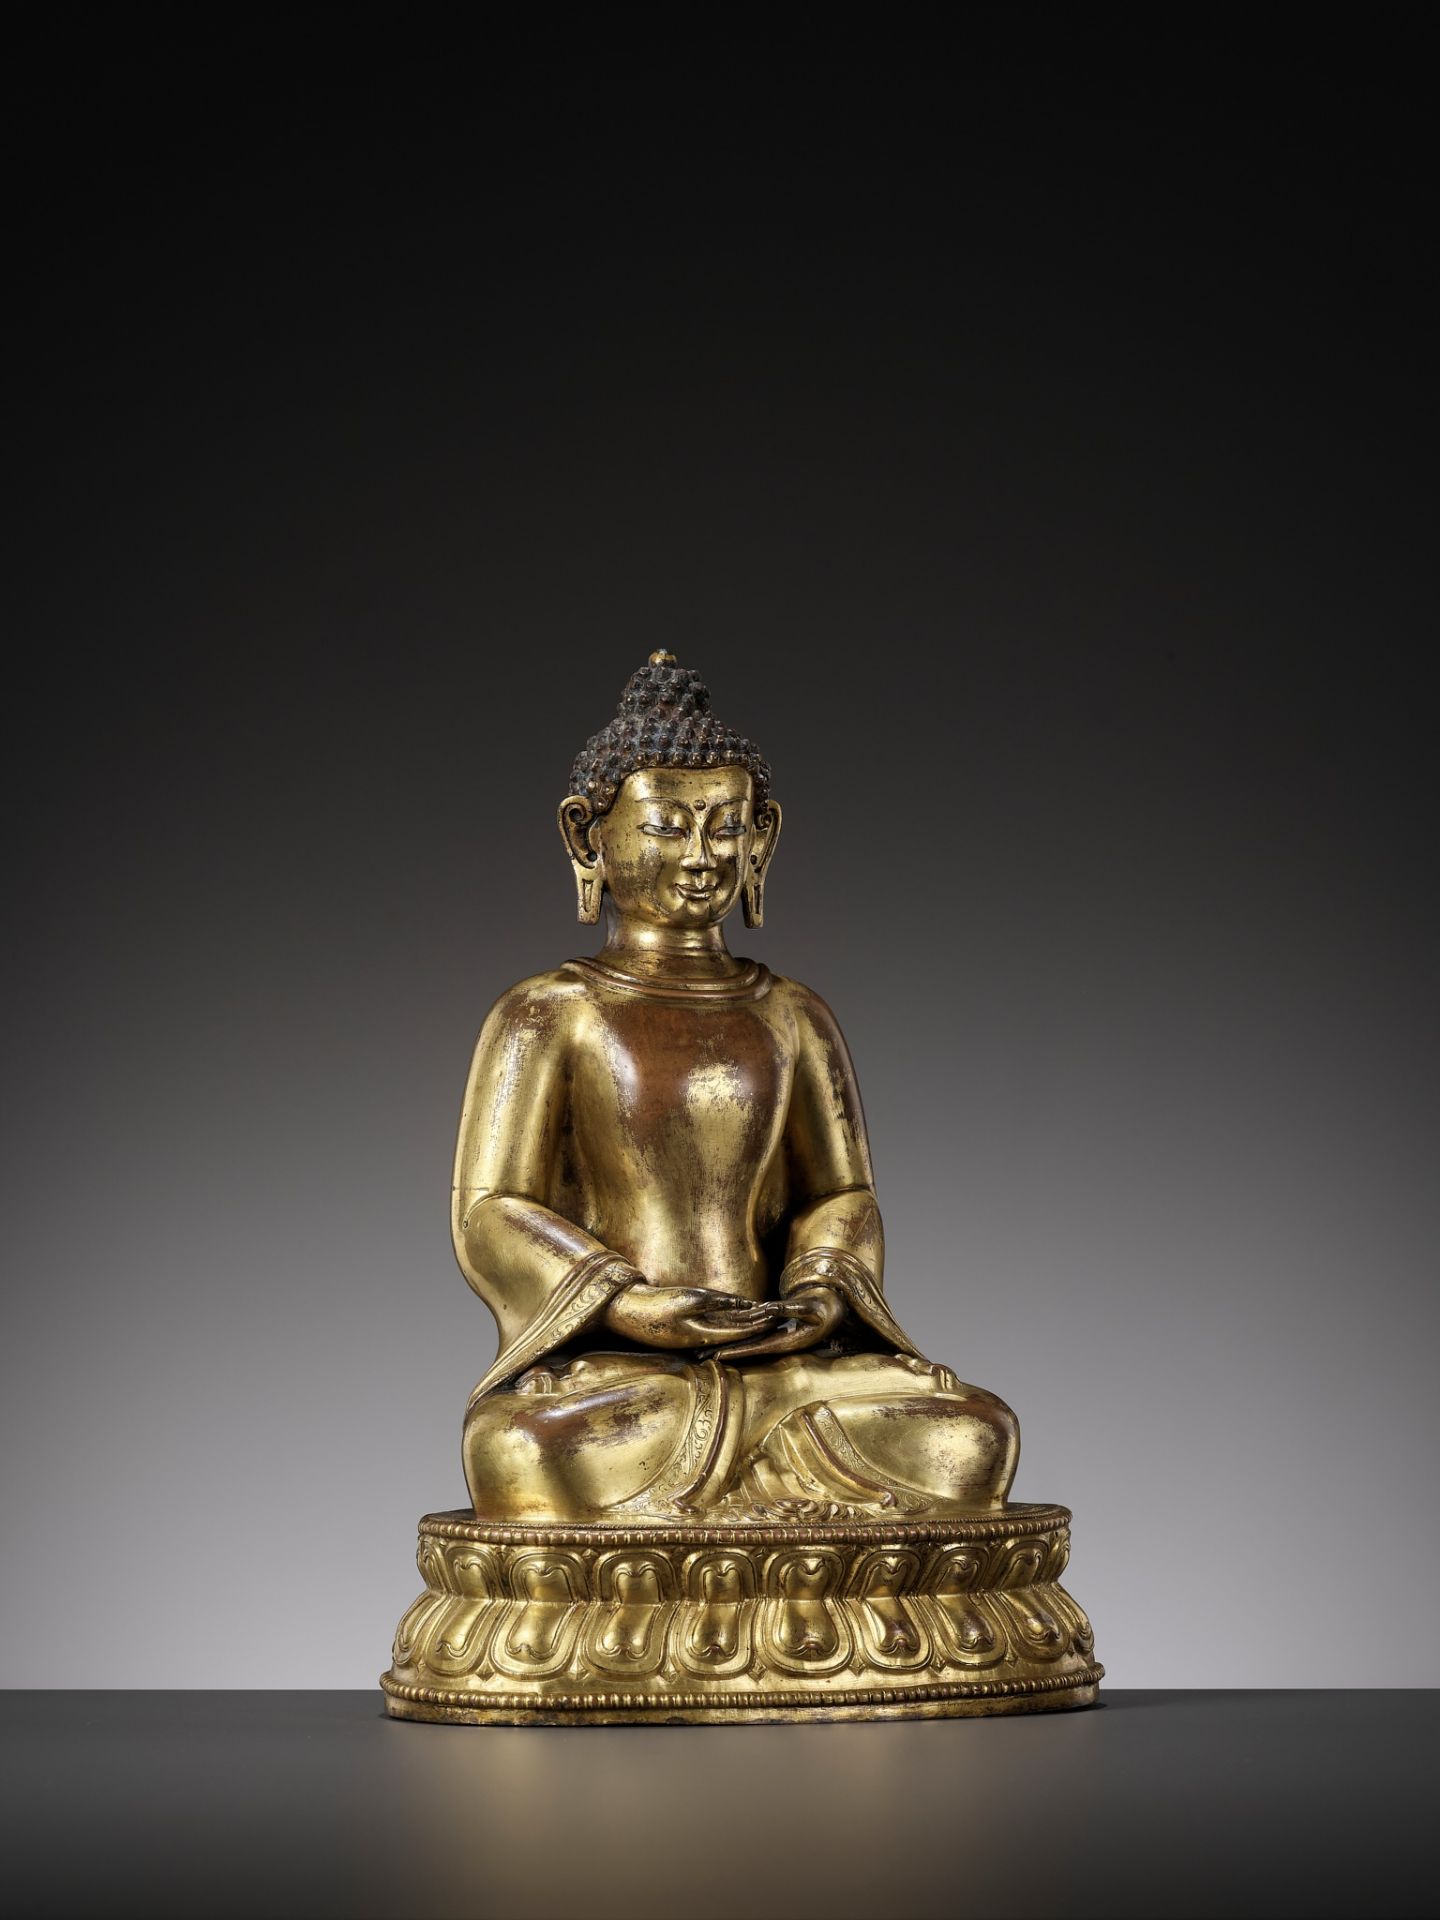 A GILT COPPER-ALLOY REPOUSSE FIGURE OF BUDDHA AMITABHA, WITH AN INSCRIPTION REFERRING TO THE SECOND - Image 14 of 16